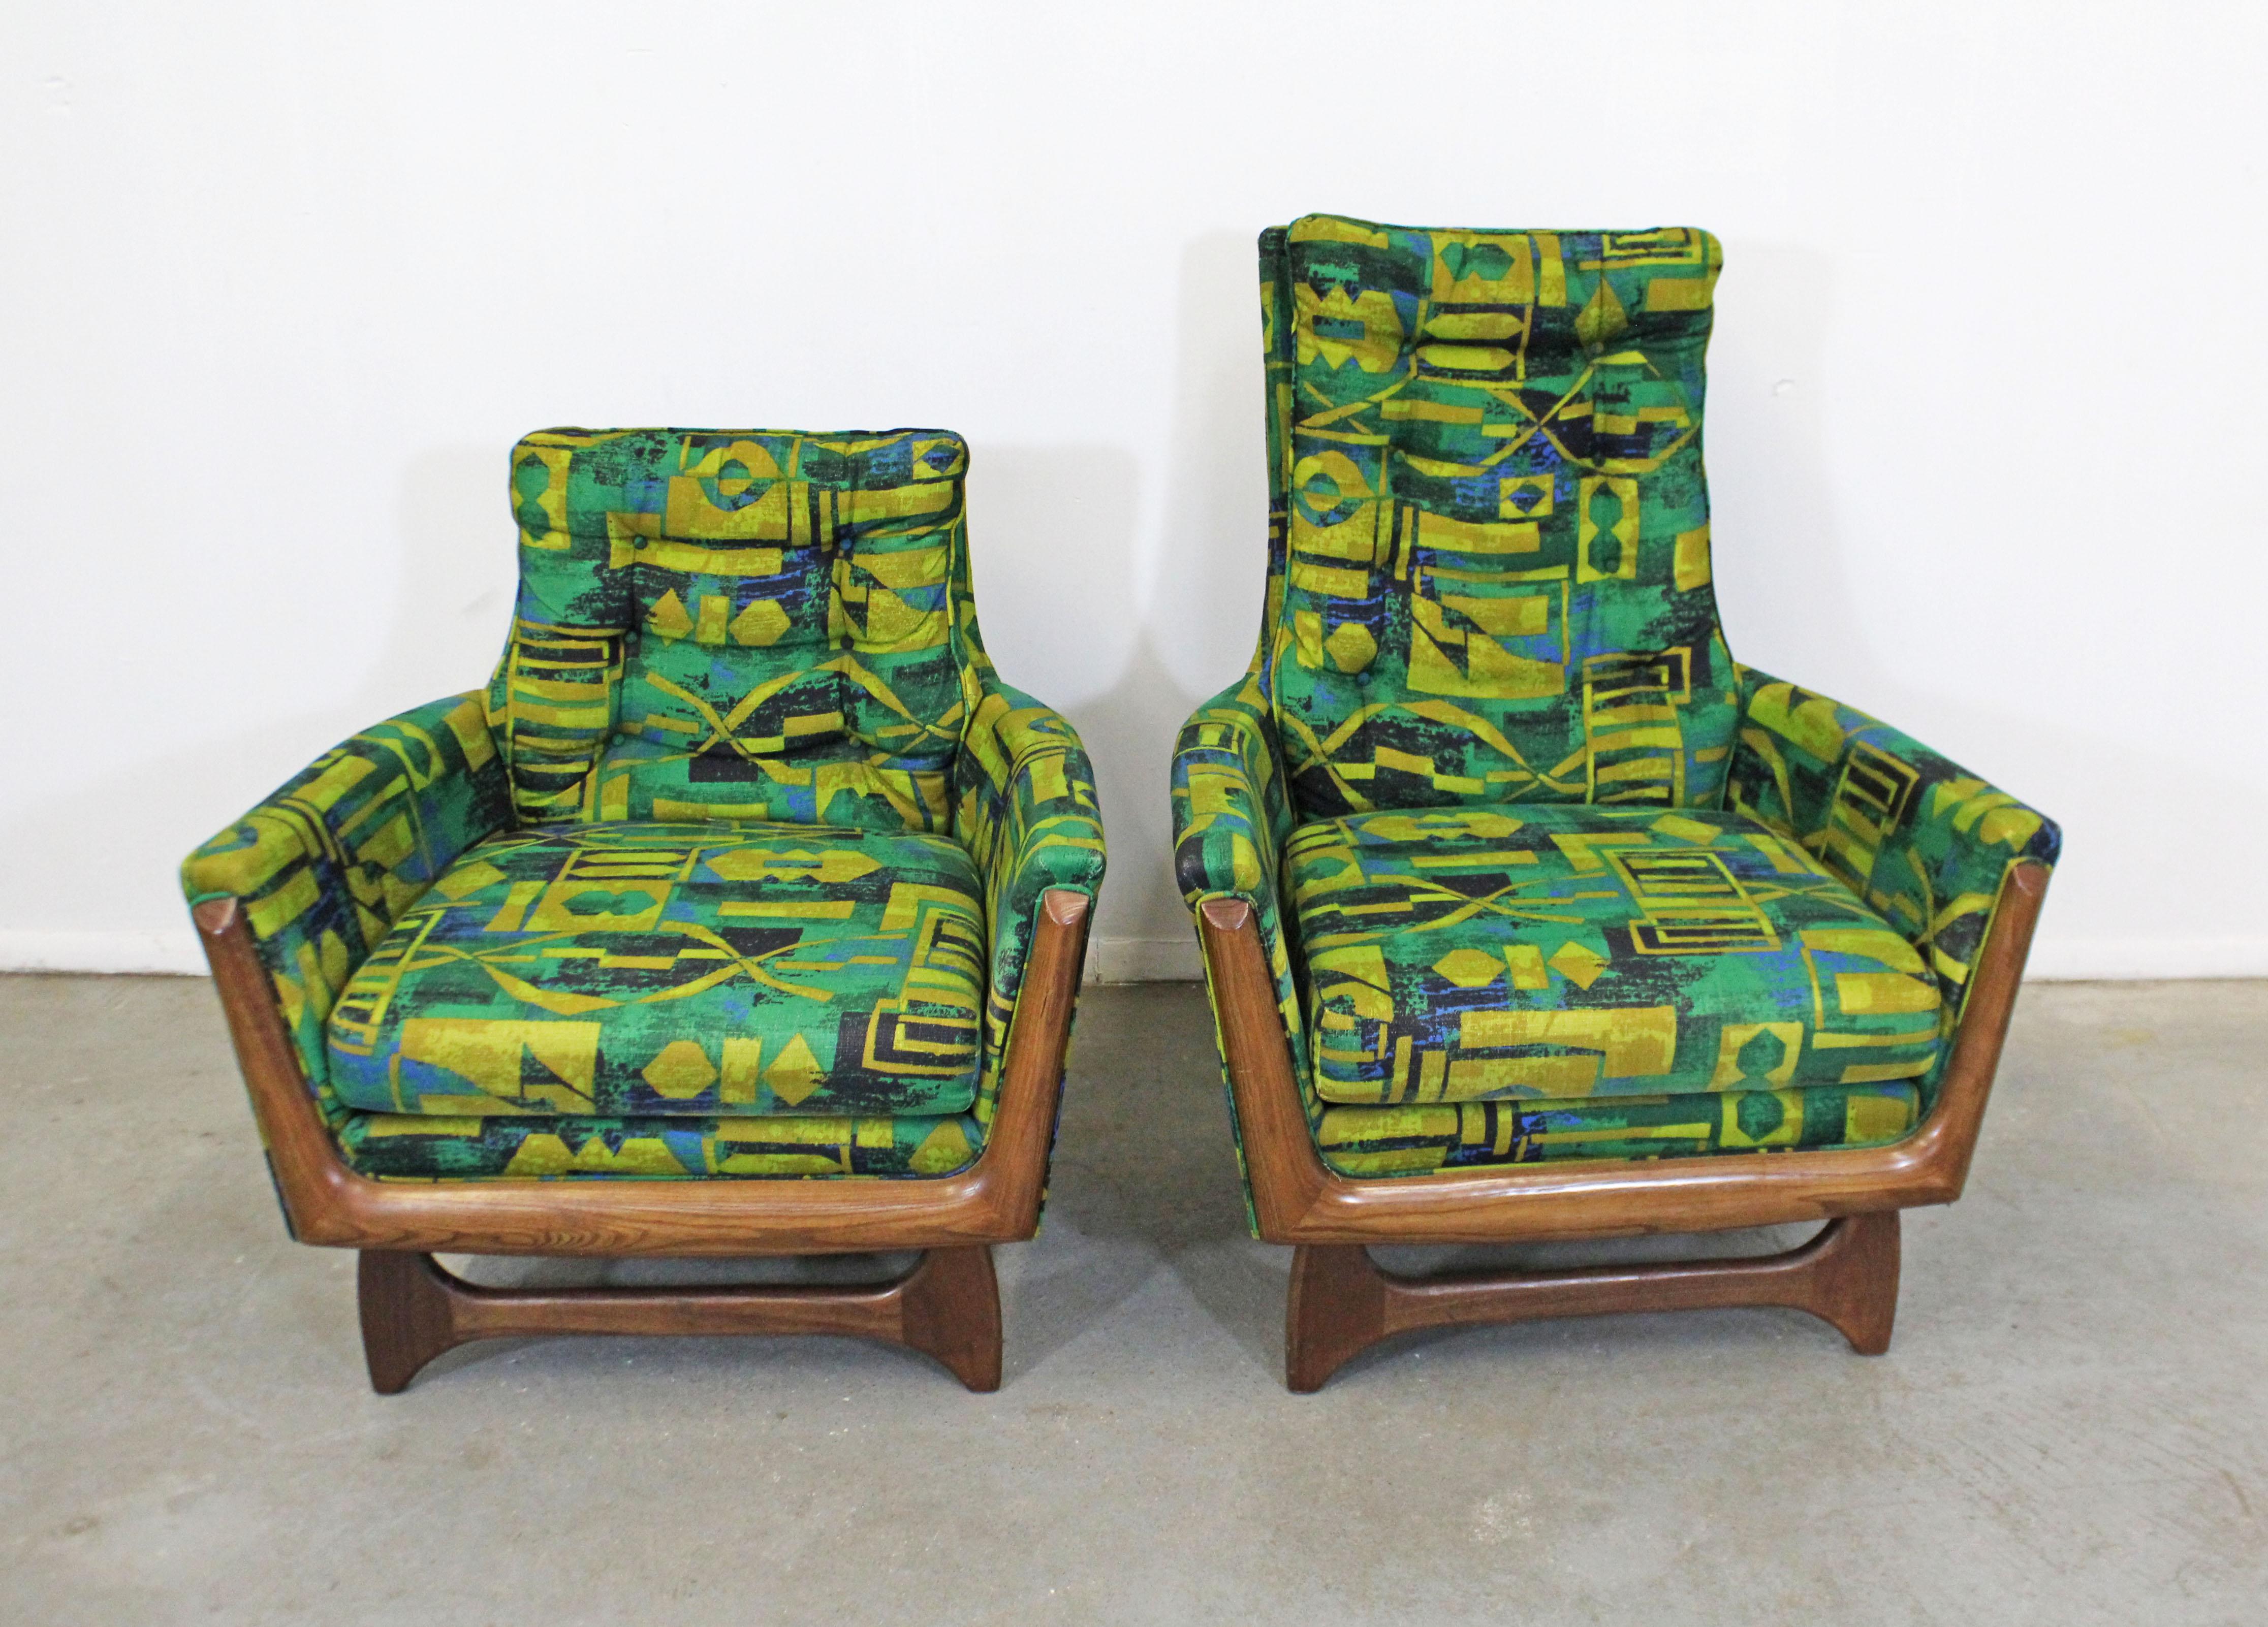 Offered is a pair of gorgeous Mid-Century Modern lounge chairs similar to the style of Adrian Pearsall. Absolutely incredible lines on these chairs. Features original upholstery with tufted back cushions. Includes arm covers. They are in good